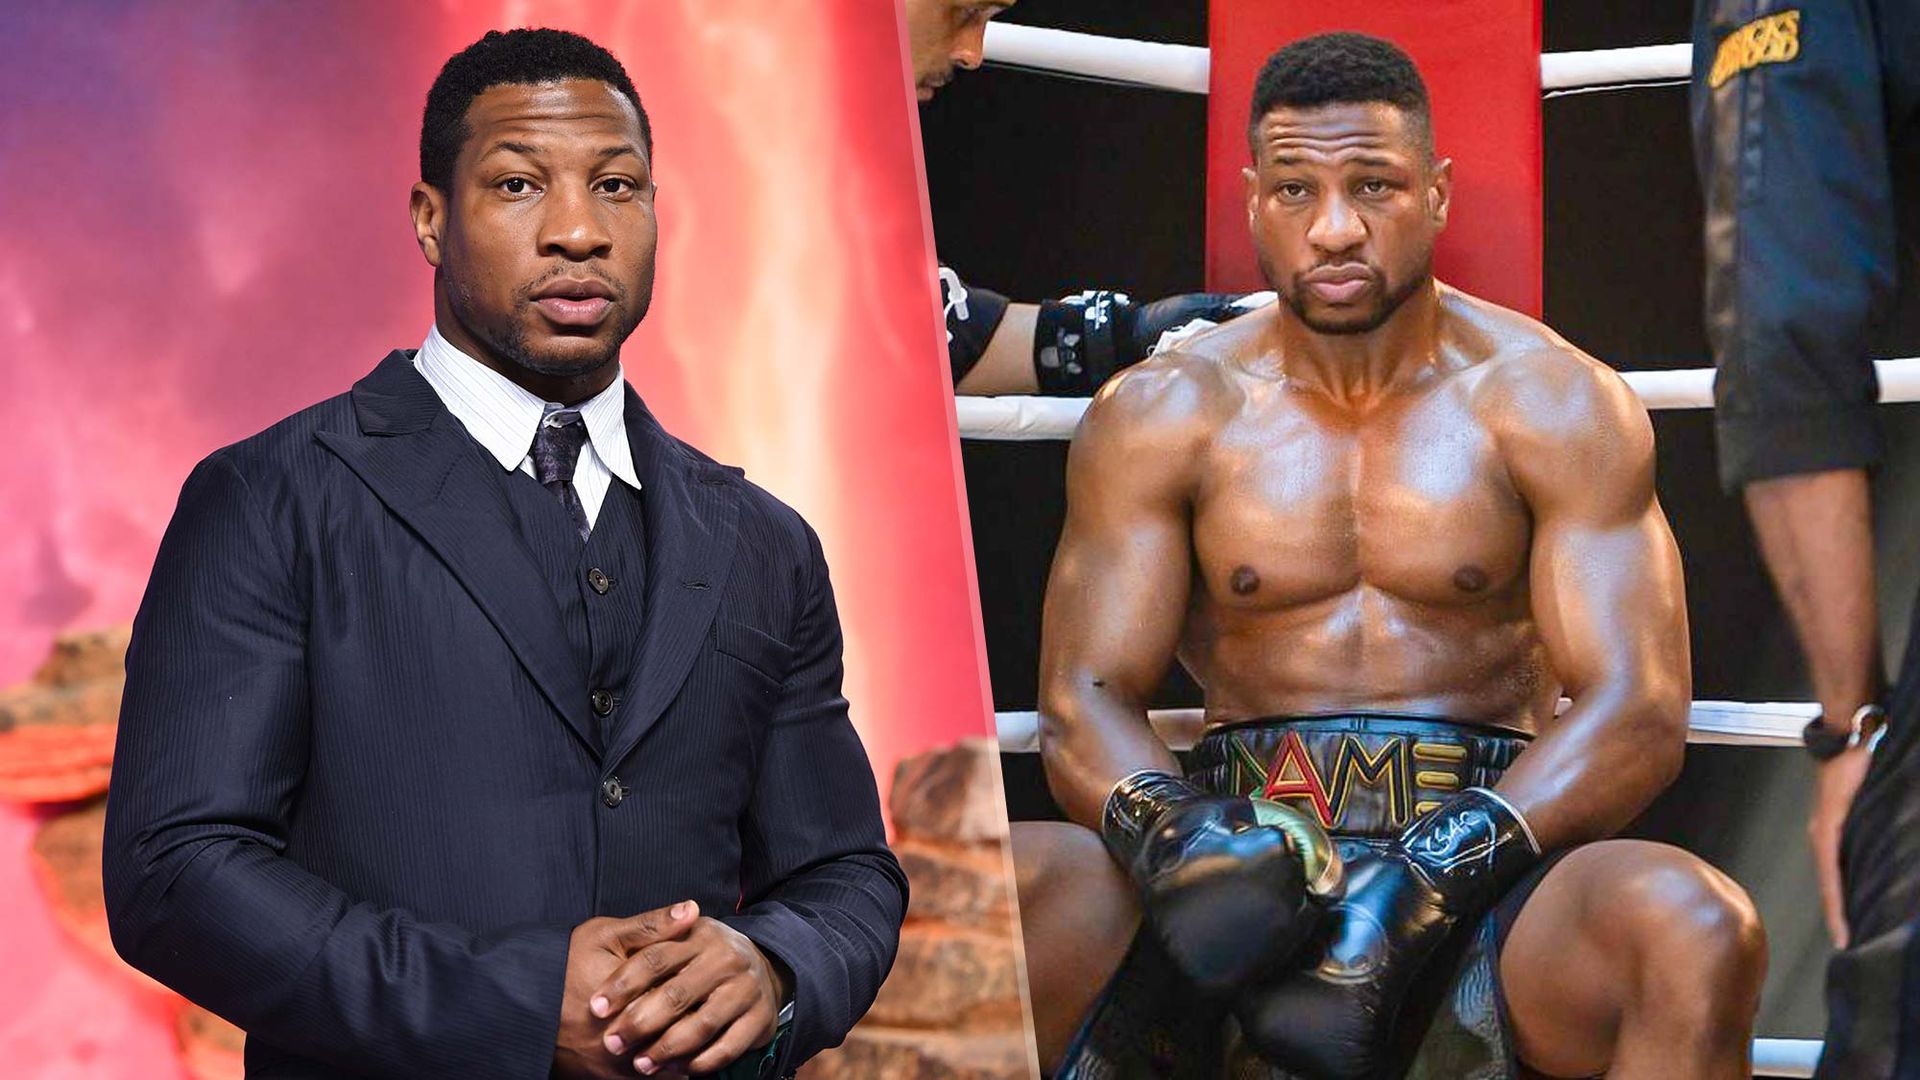 I Tried Jonathan Majors Creed 3 Workout — Heres What Happened Toms